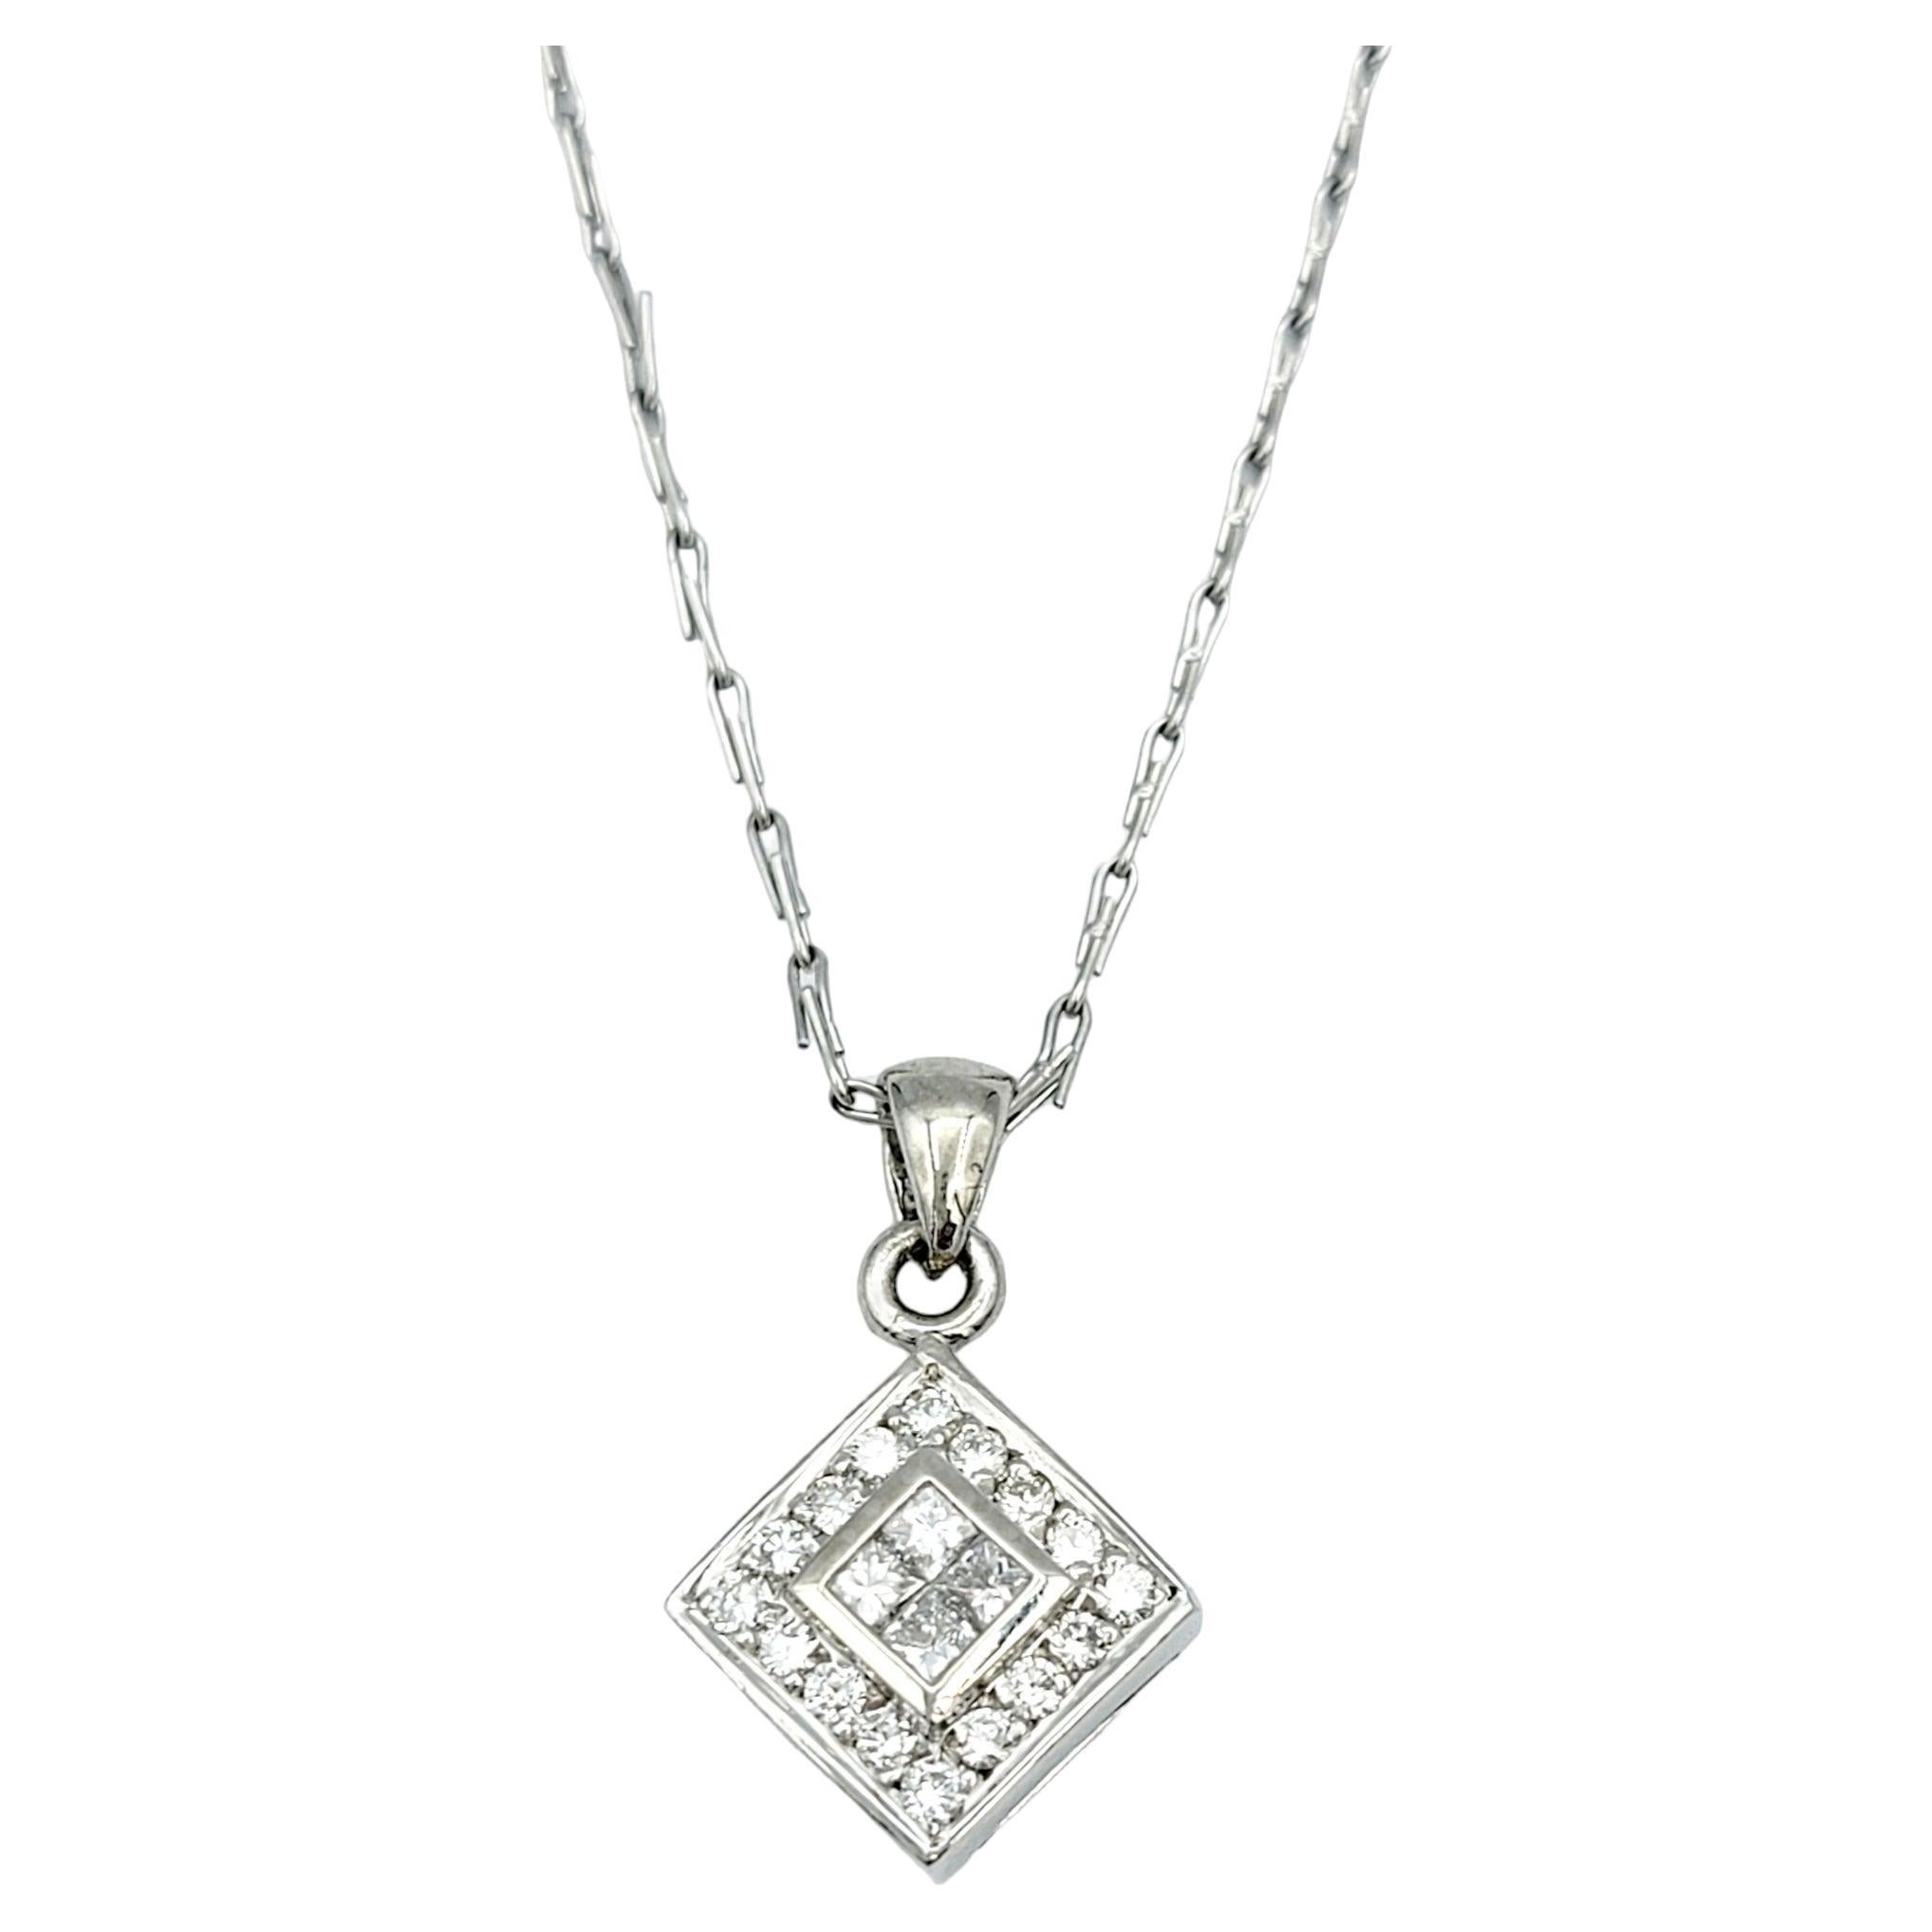 Drape yourself in the epitome of sophistication with this platinum pendant necklace, a stunning embodiment of modern elegance. The square pendant is a masterpiece in itself, featuring four princess-cut, invisible-set diamonds at its core, creating a